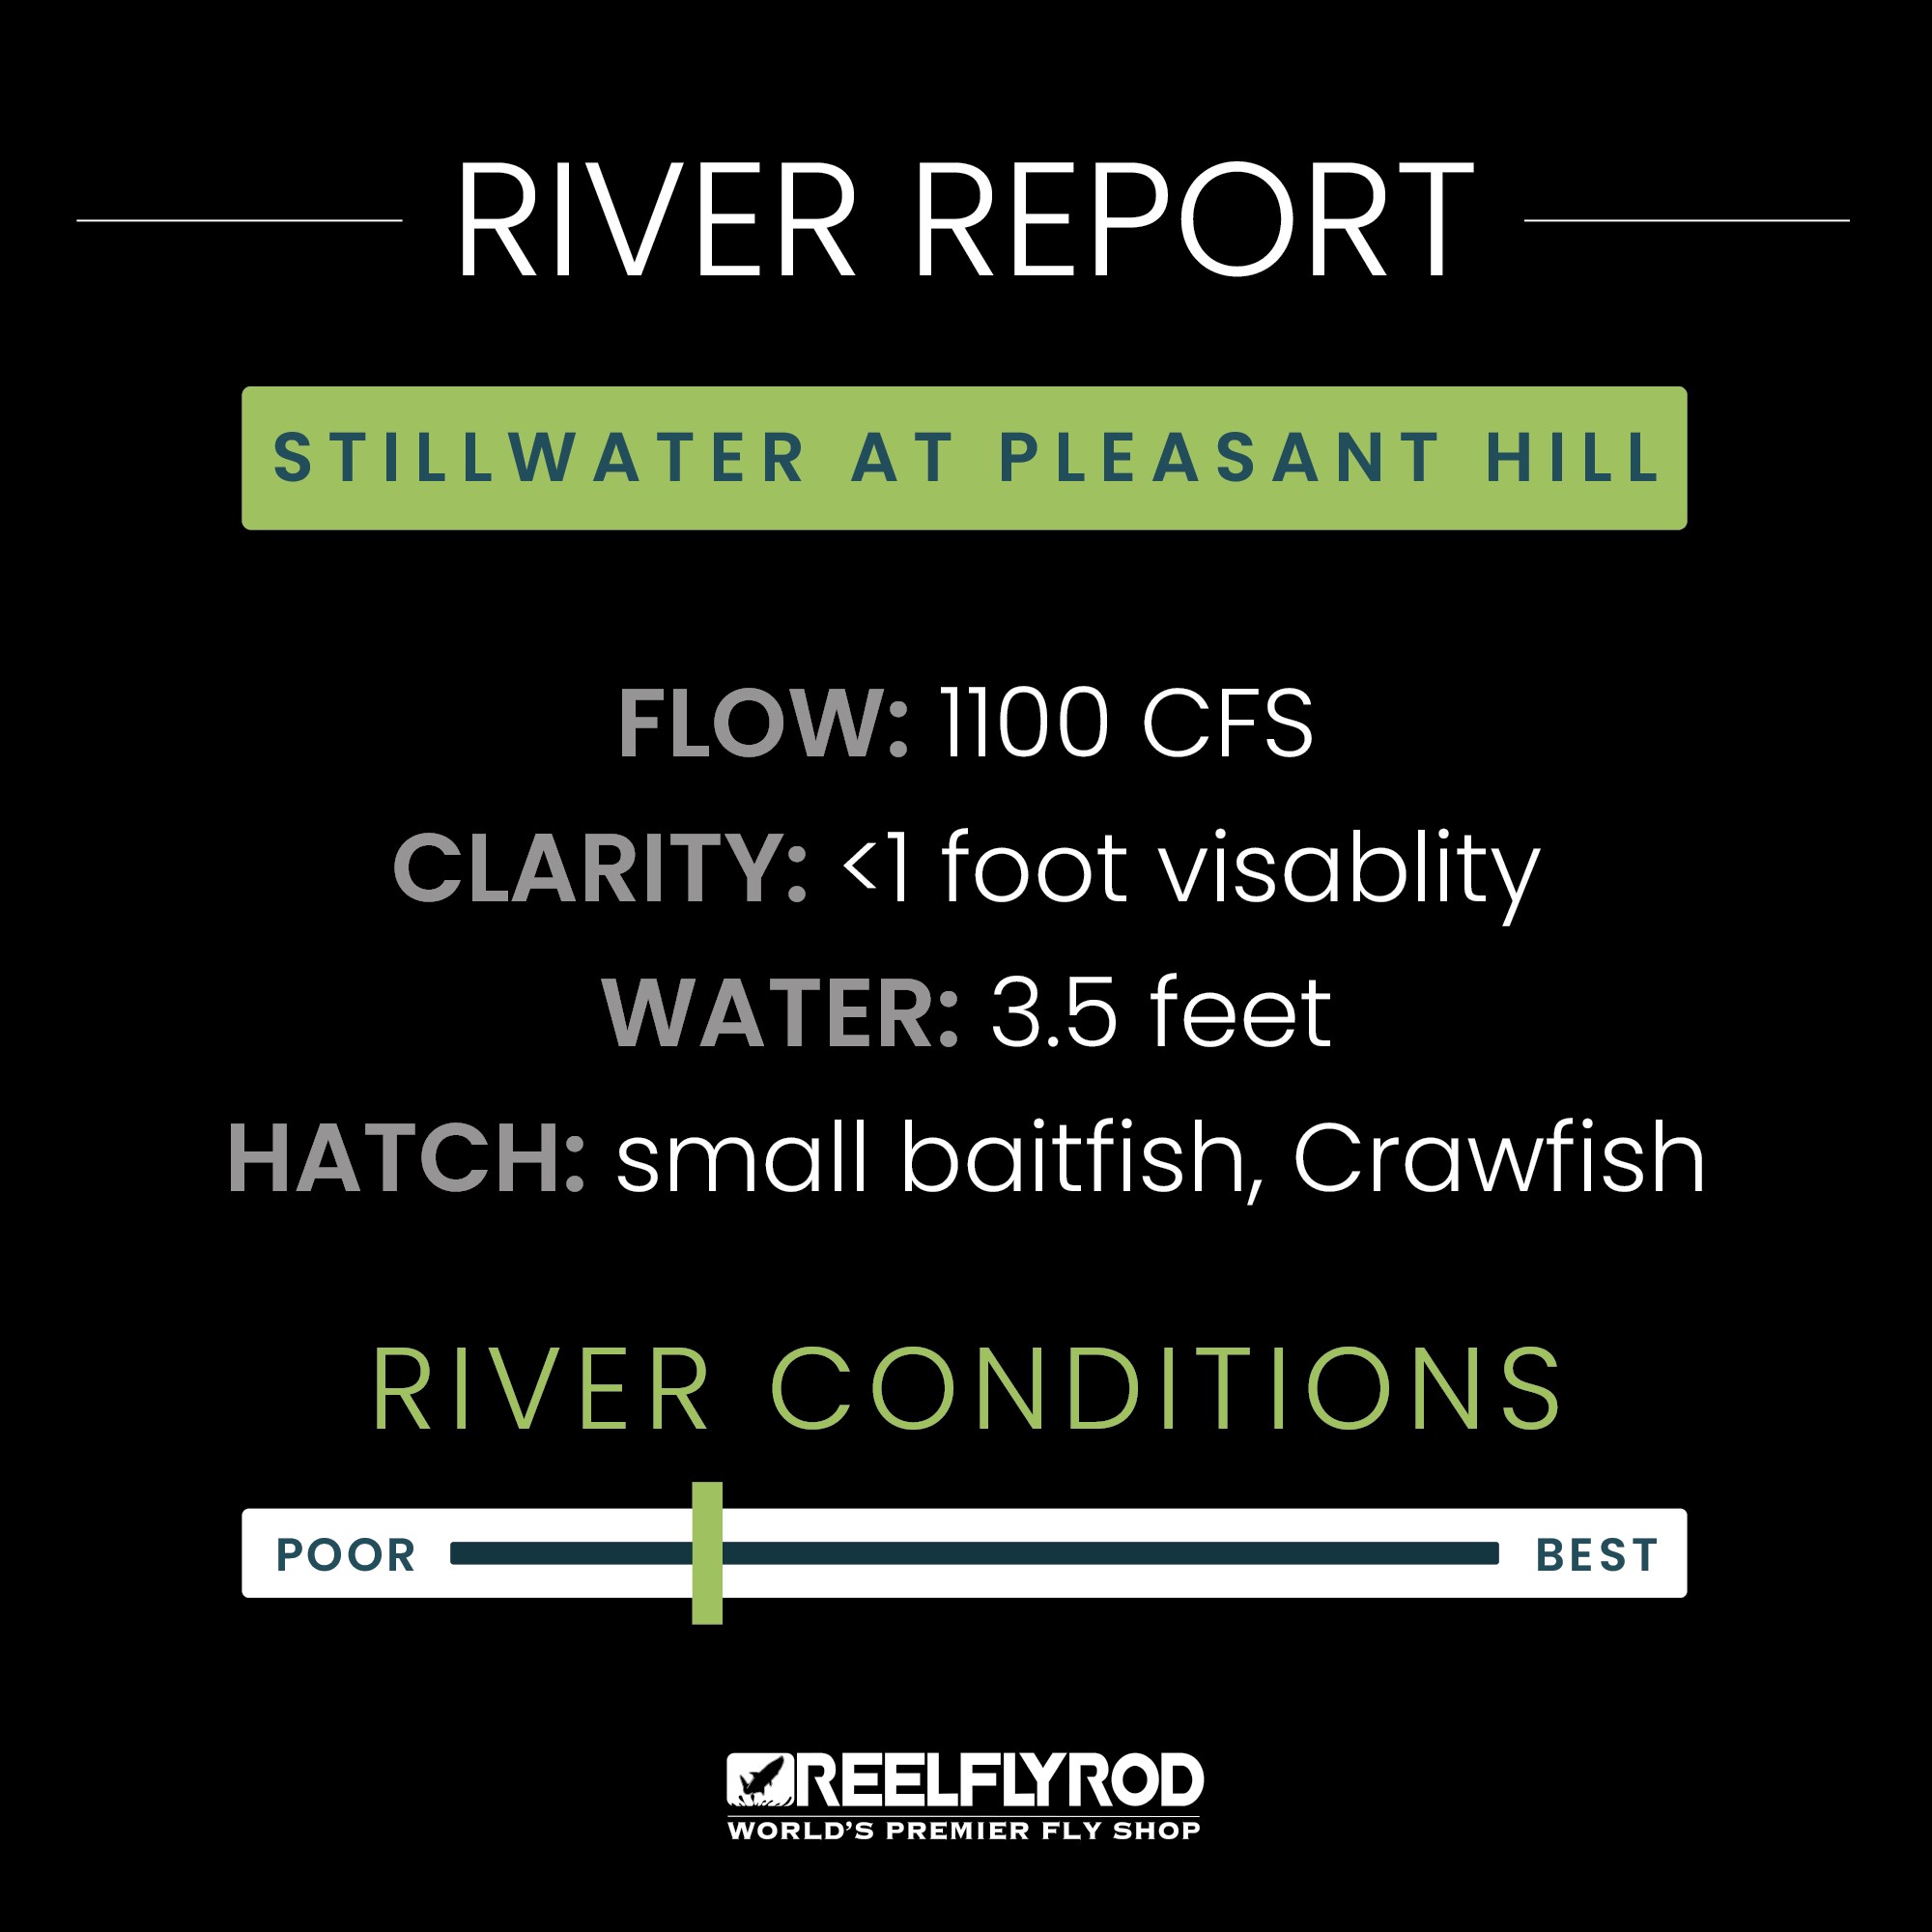 Fishing Report for the Stillwater River showing the Flow Rate, Clarity, Water Quality and Current Hatch